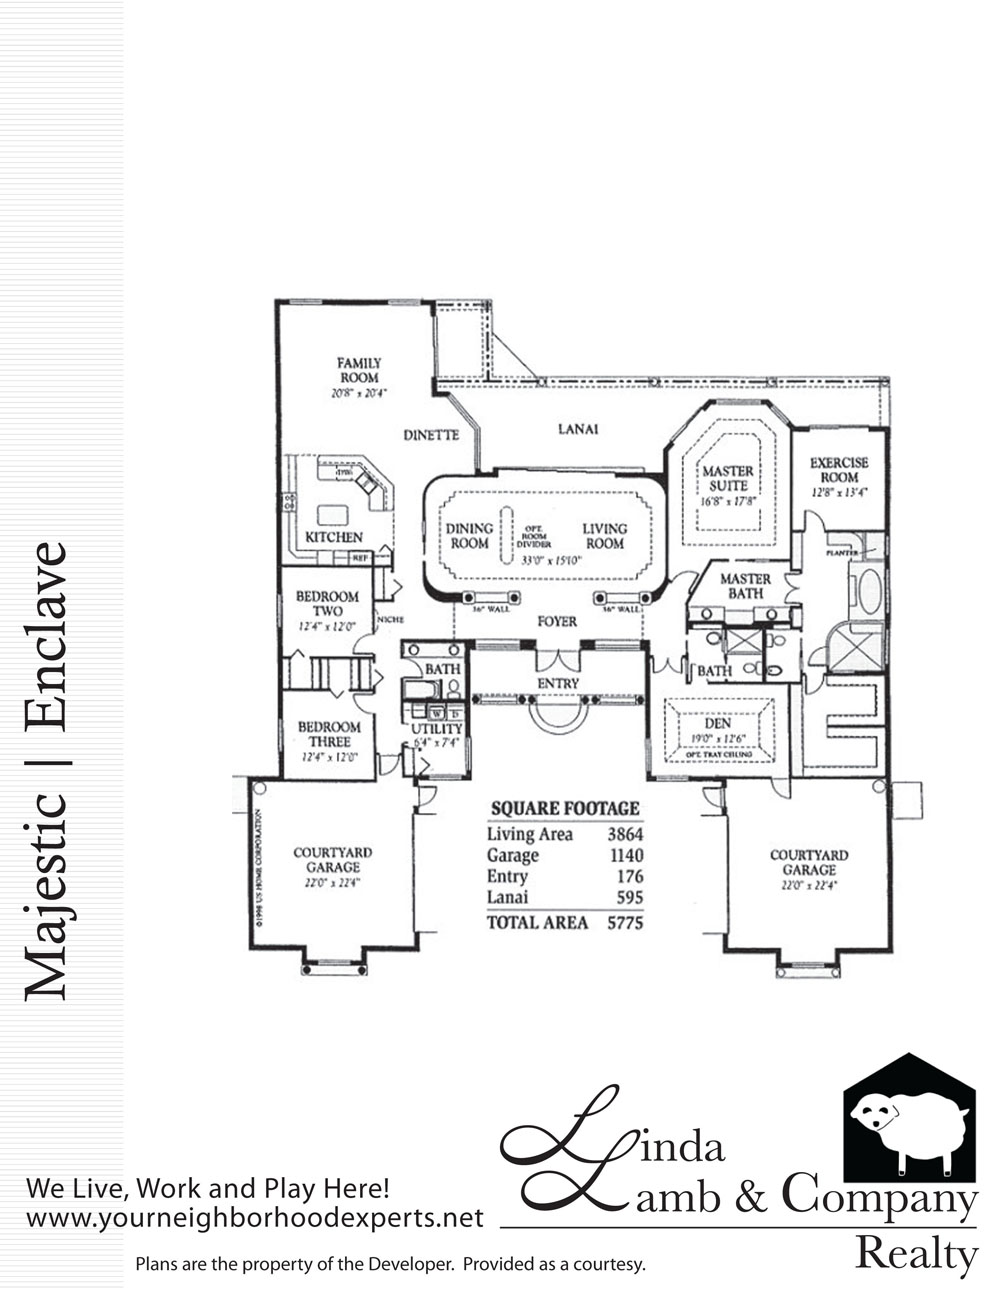 majestic floor plan, heritage palms golf and country club, enclave, fort myers, florida, linda lamb and company real estate